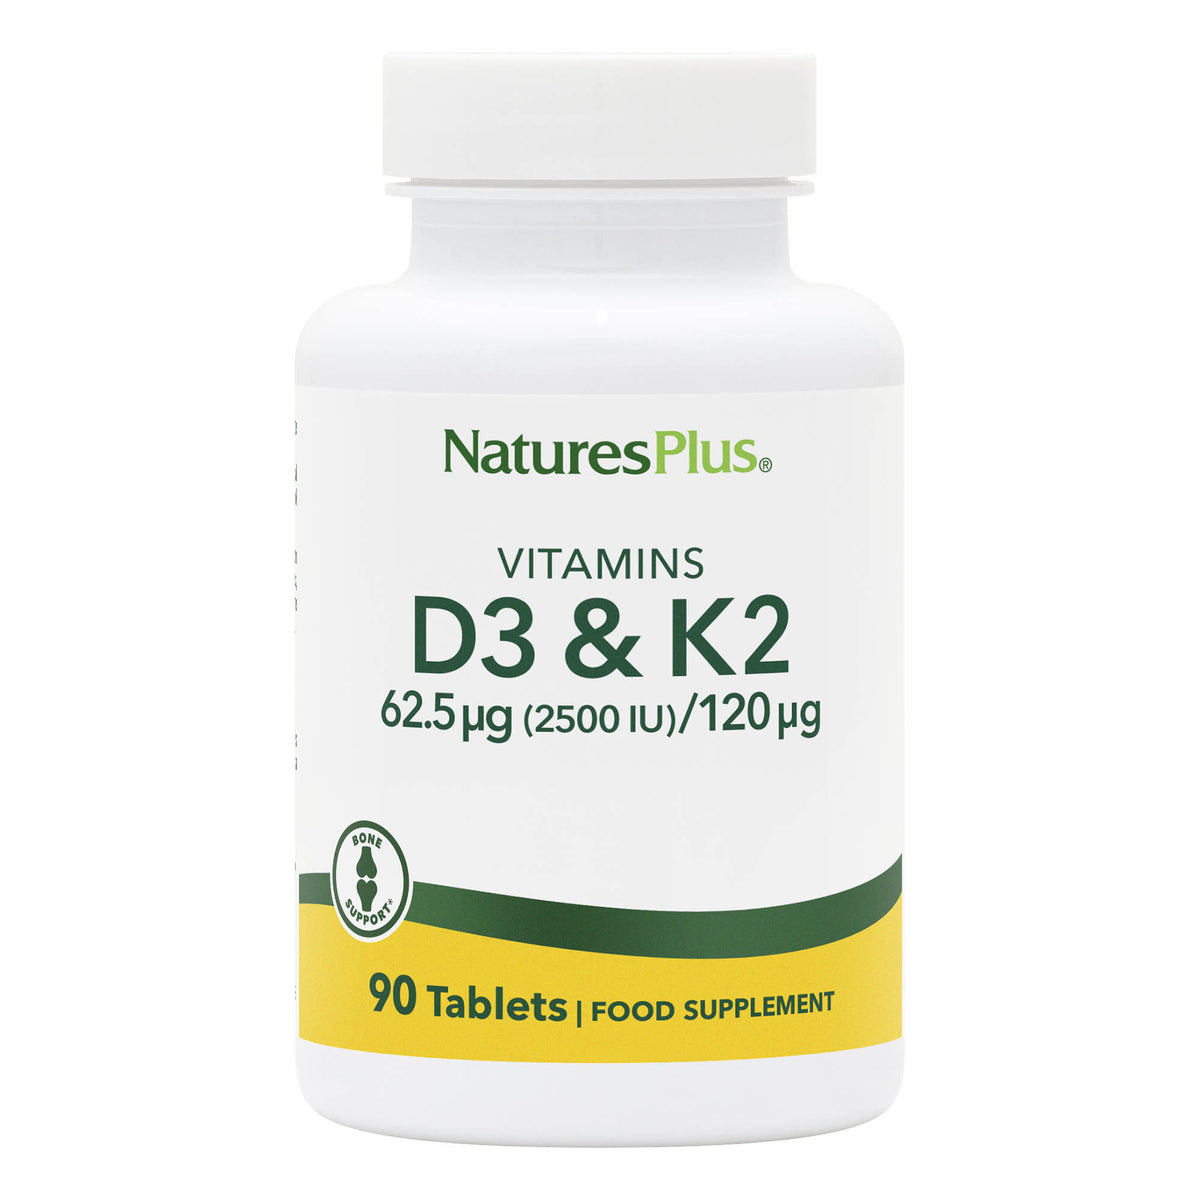 product image of Vitamin D3 2500IU with K2 120mcg Tablets containing Vitamin D3 2500IU with K2 120mcg Tablets